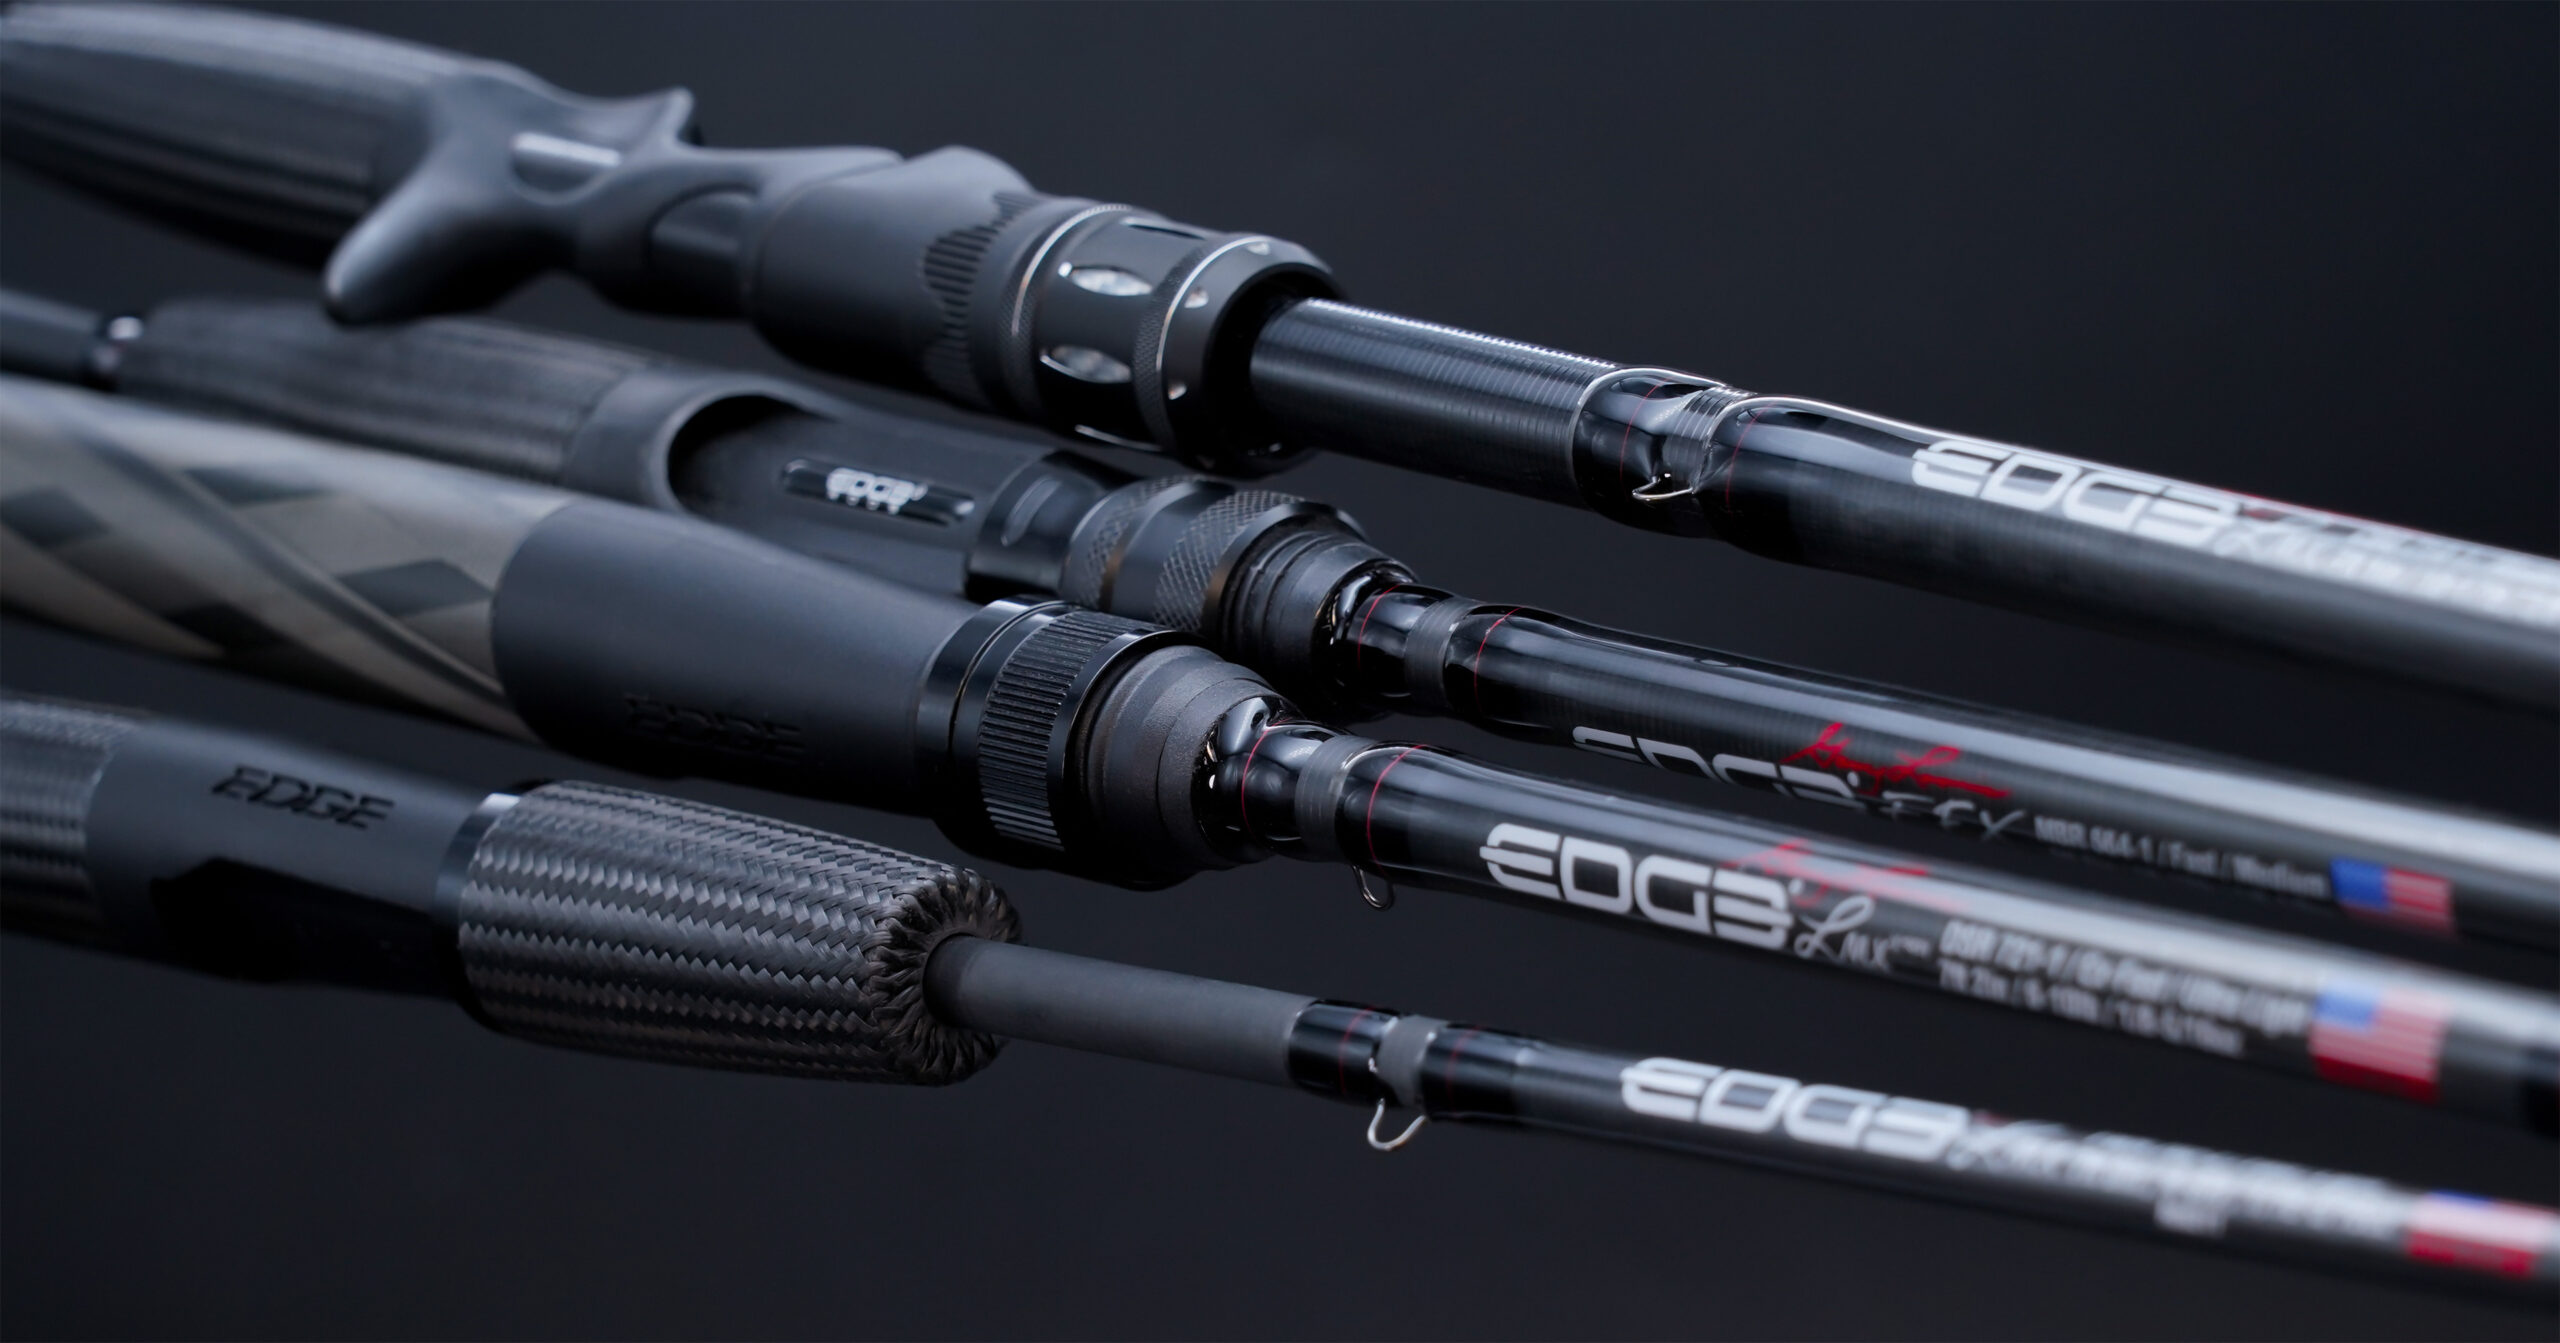 Top 10 fishing rods for freshwater fishing - Edge Rods Europe